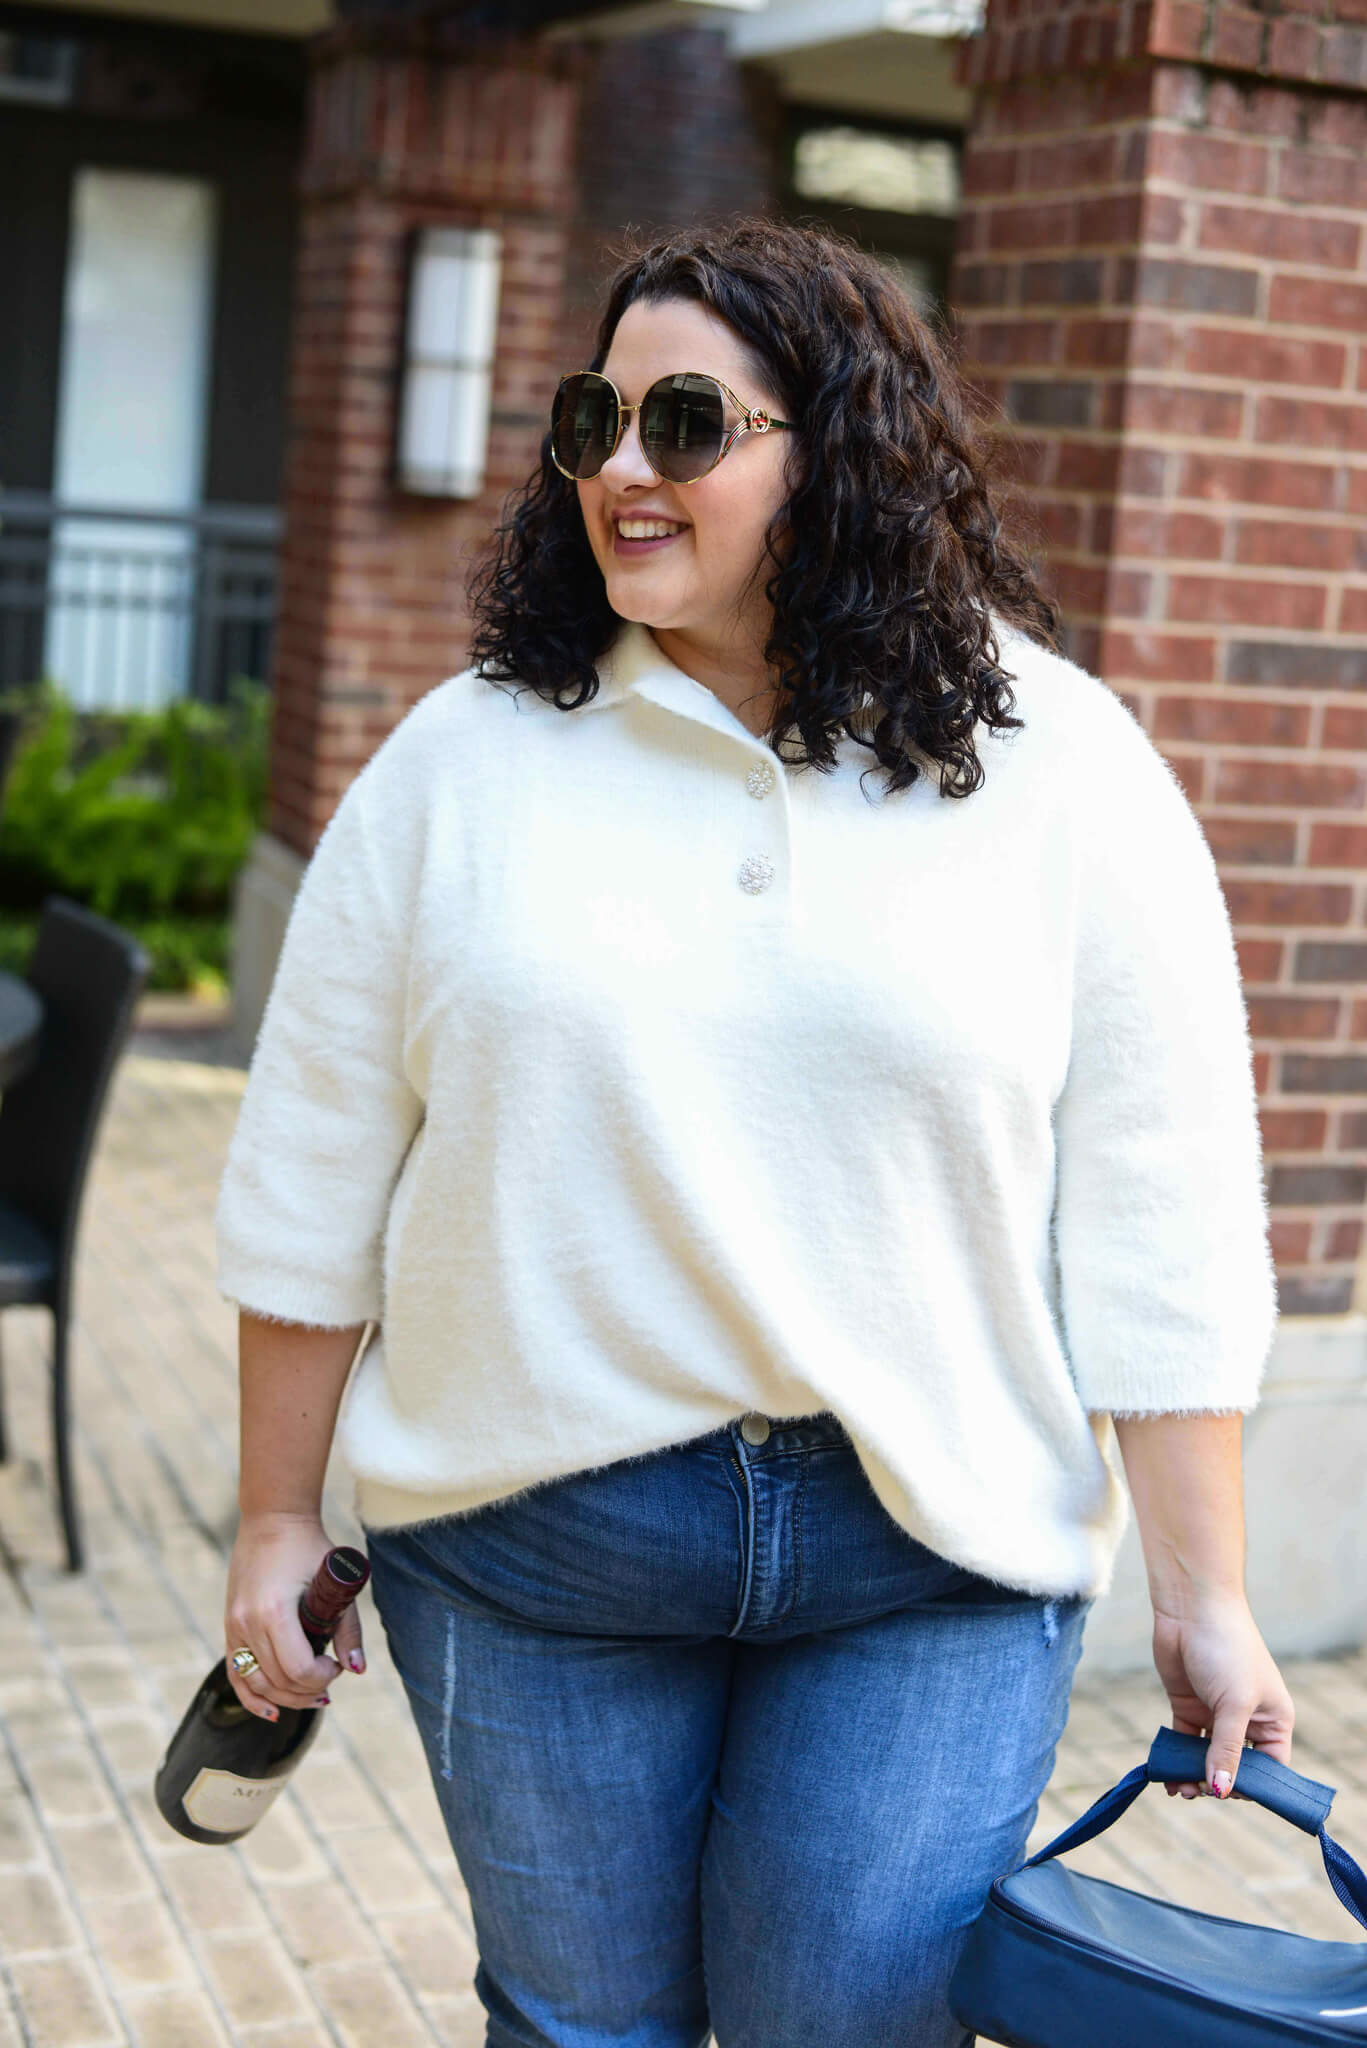 Choosing an outfit to wear to Thanksgiving dinner can be difficult, but this short sleeve cream sweater from H&M immediately captured my attention and is perfect for Turkey Day celebrations